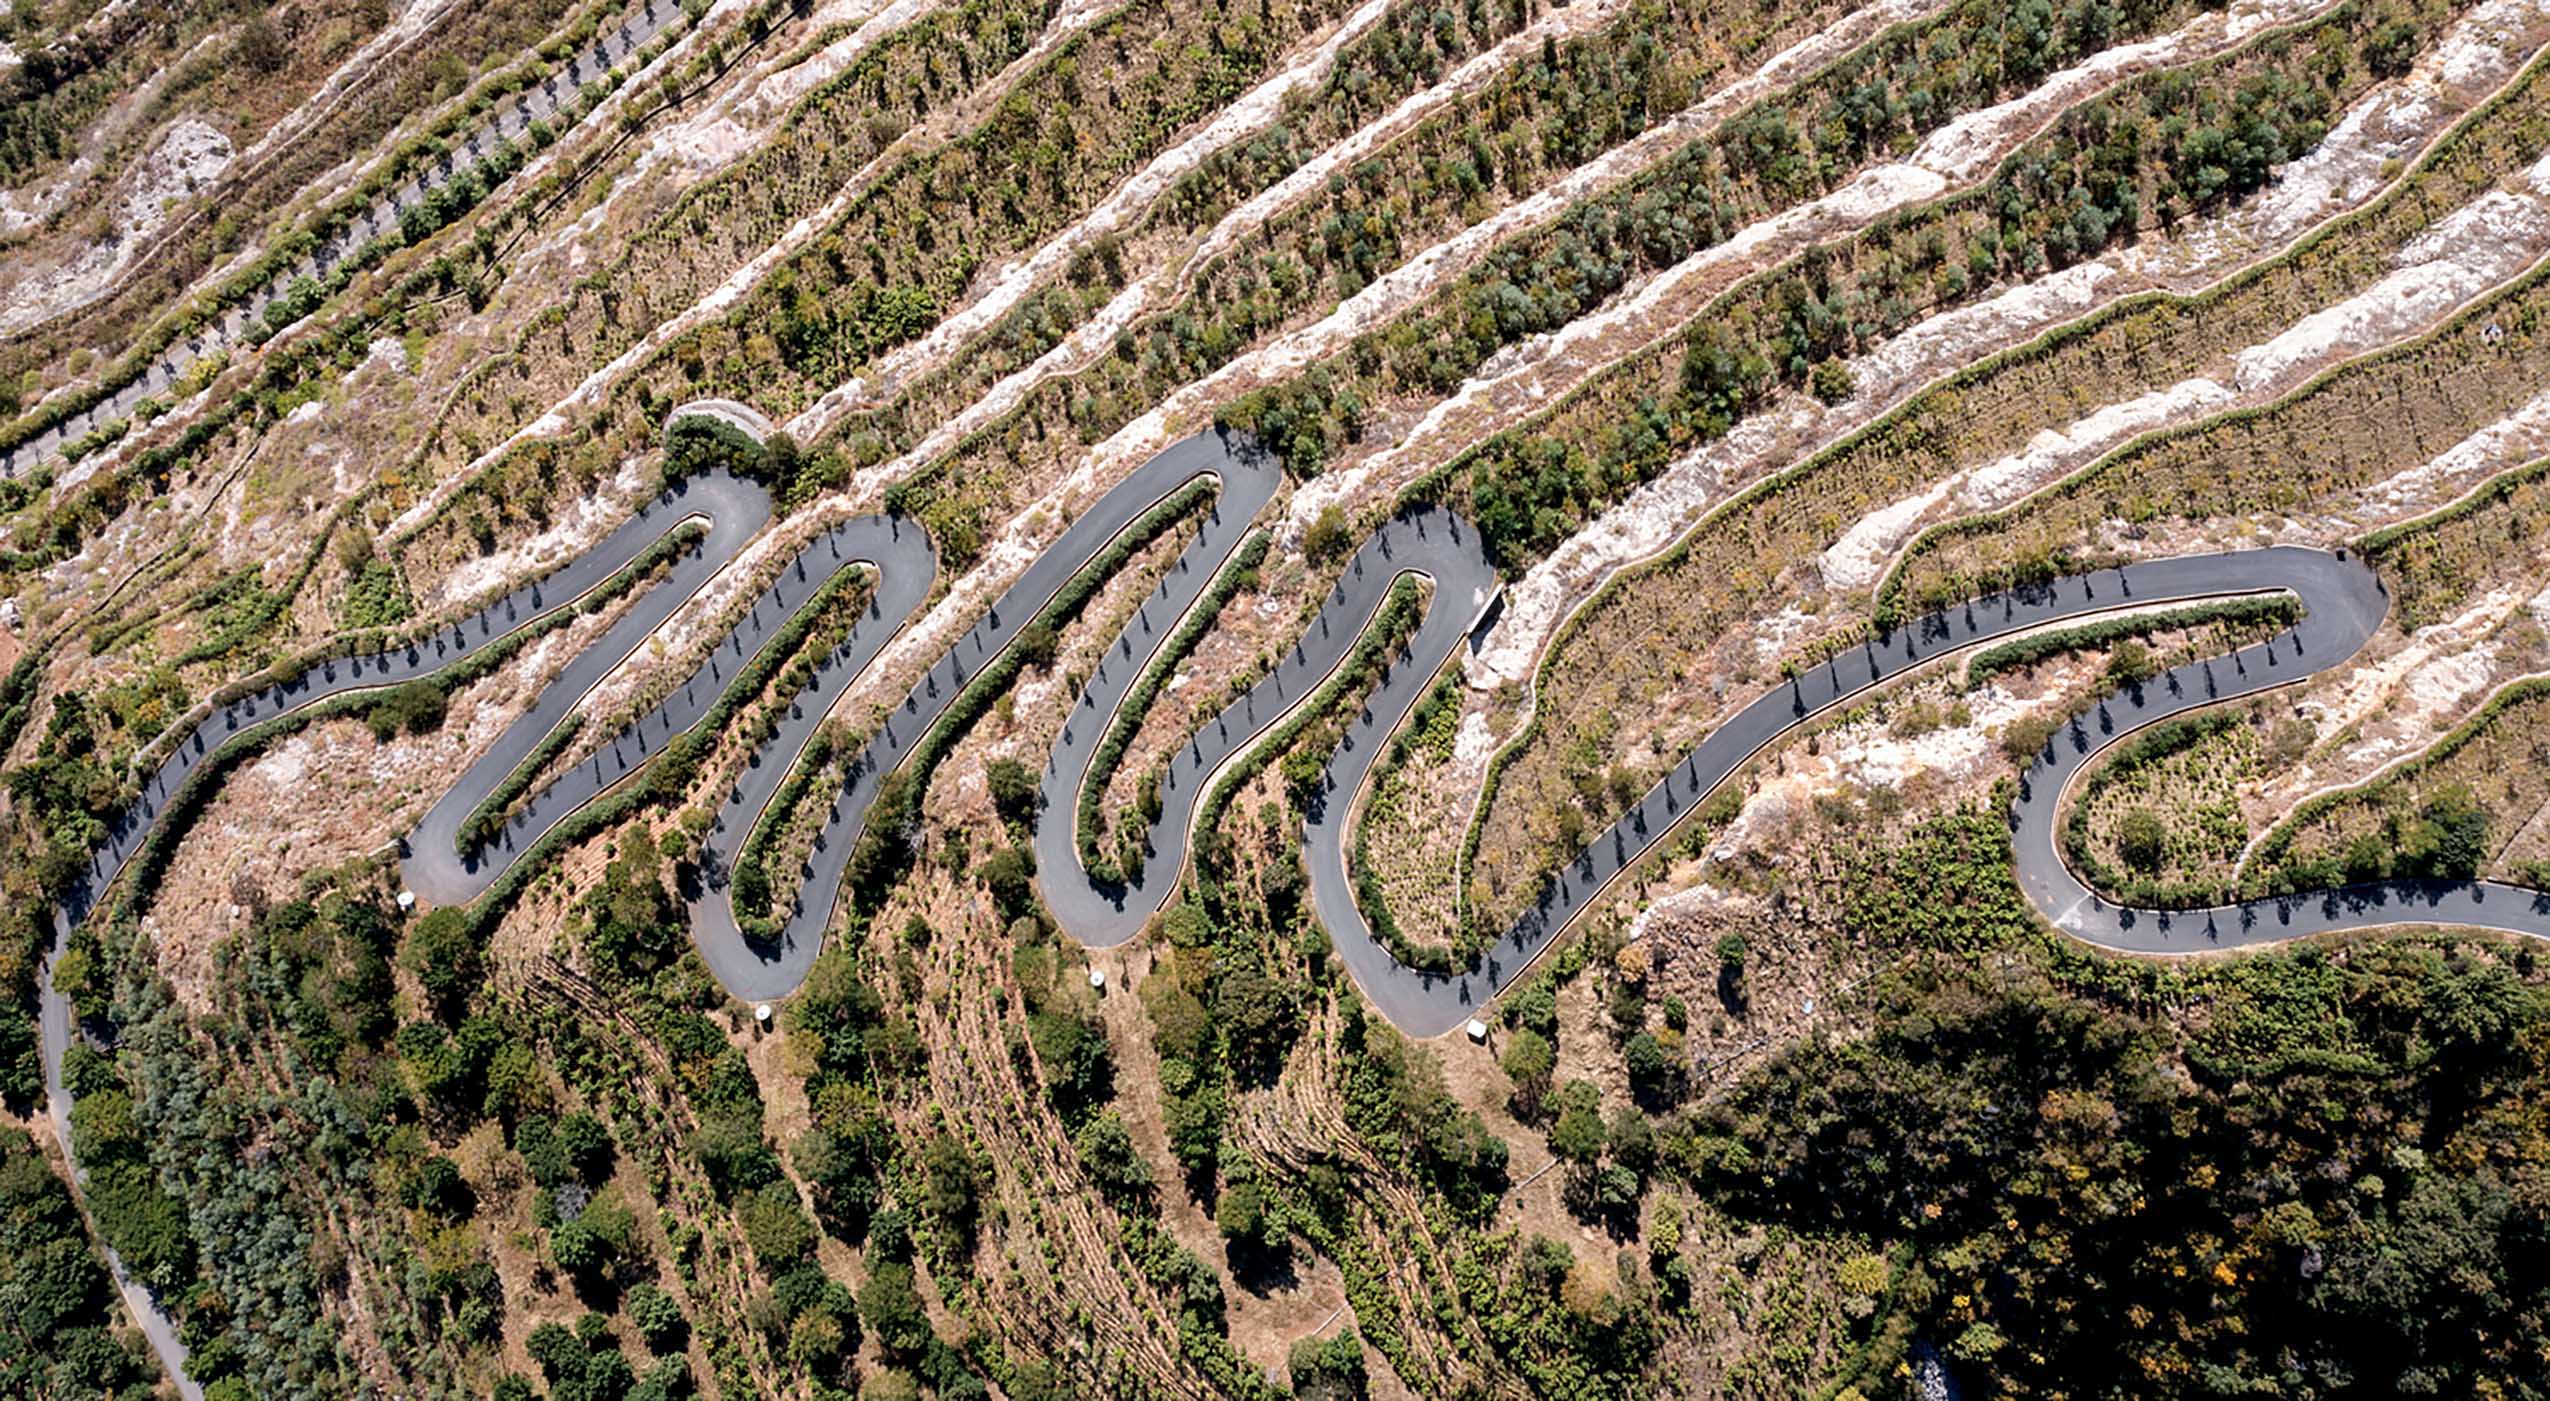  This aerial photo shows a paved road in a mining site after ecological restoration in a cycad national nature reserve in Panzhihua, southwest China's Sichuan Province.   The city of Panzhihua boasts China's only national-level cycad nature reserve, with over 385,000 cycad plants.  Local authorities and Panzhihua Iron and Steel have stepped up efforts to protect cycad plants, amid the city's green development and endeavors to restore ecosystems.  Mining has been stopped in the reserve. Mountains that used to be bare due to the mining have turned green again. (Xinhua/Xu Bingjie)